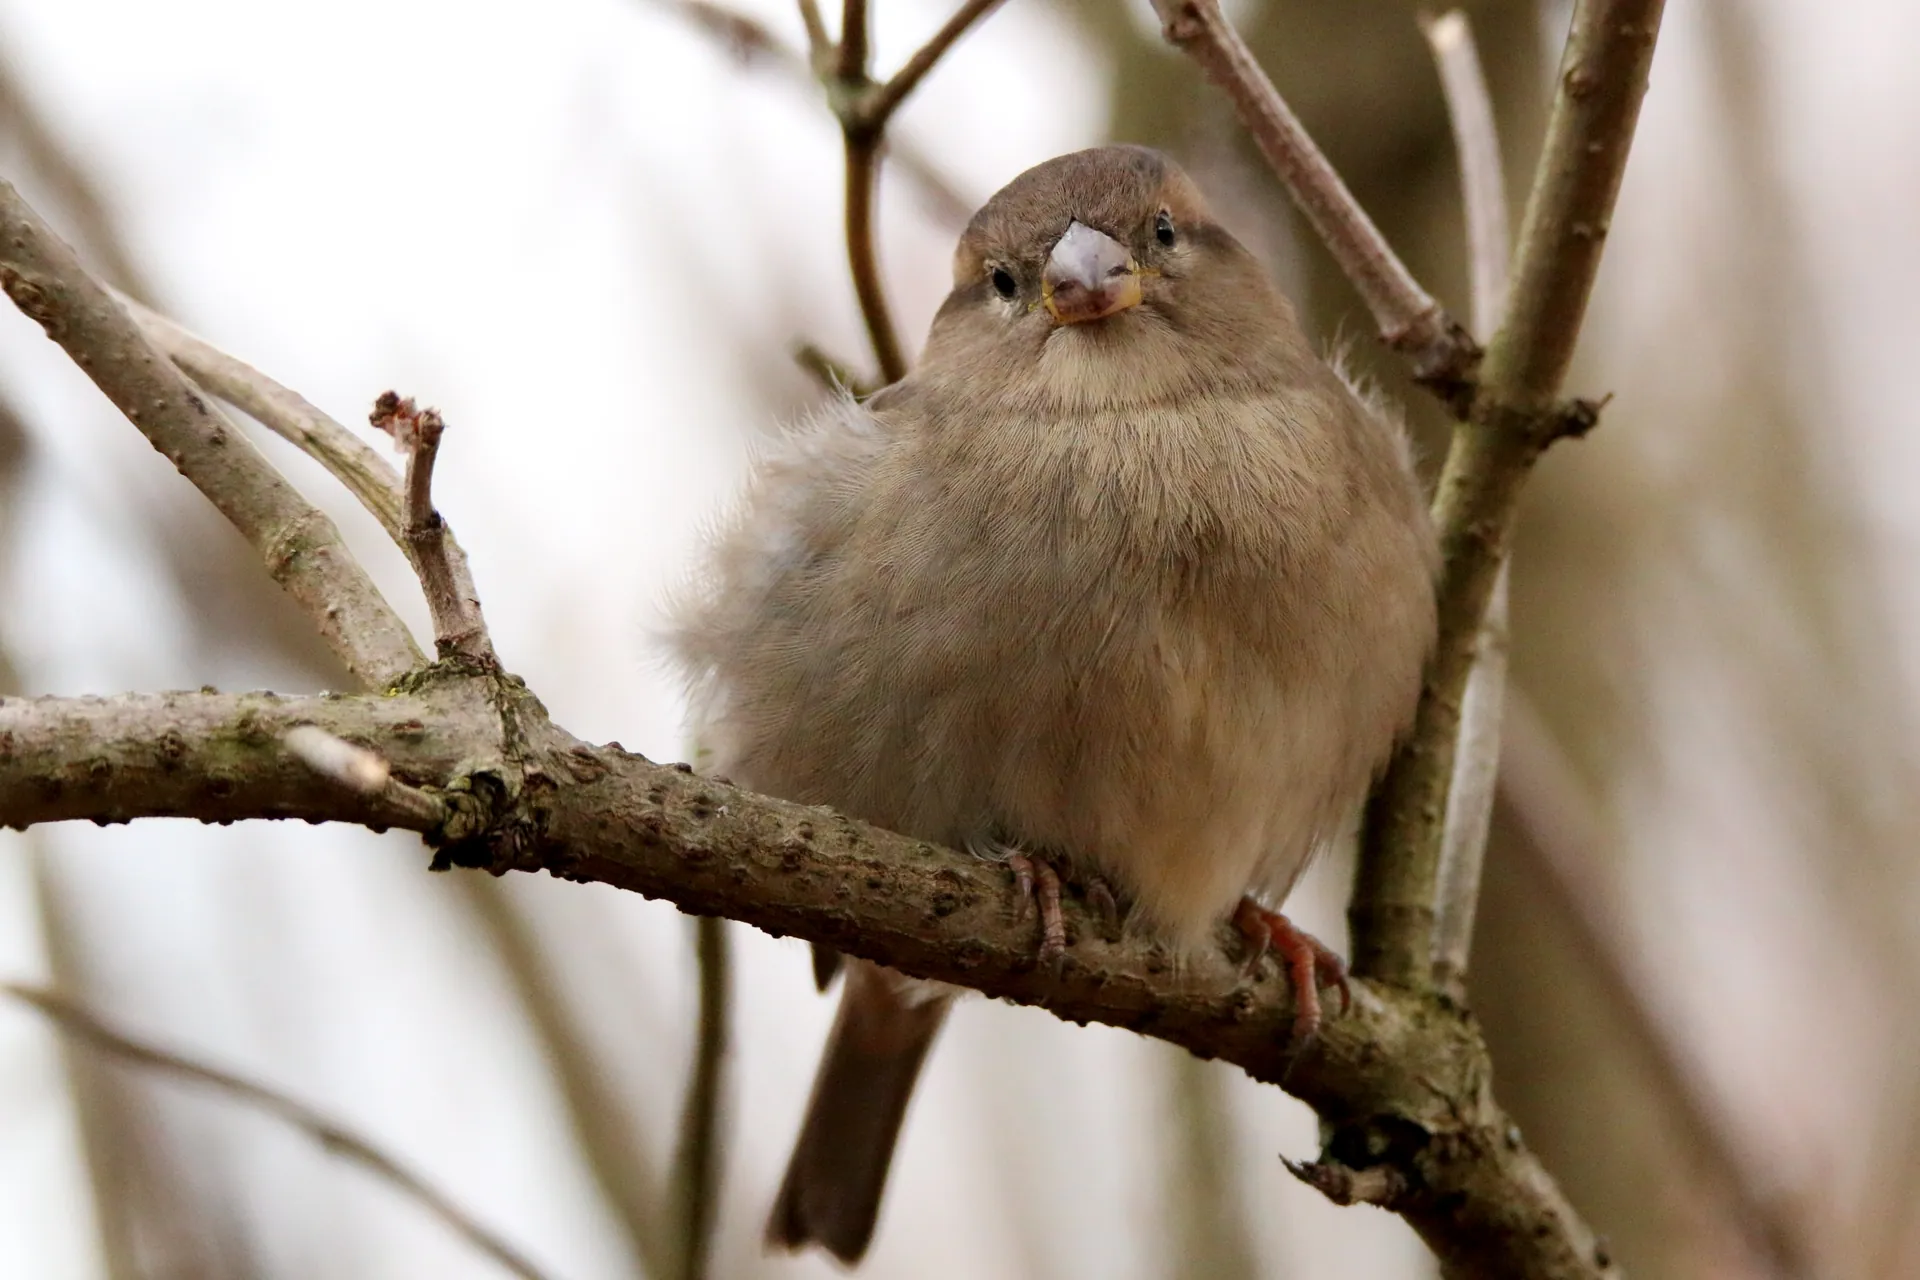 A really fluffy looking sparrow, I'd hate to call it fat but I am sure they won't starve with all the visitors in the zoo.